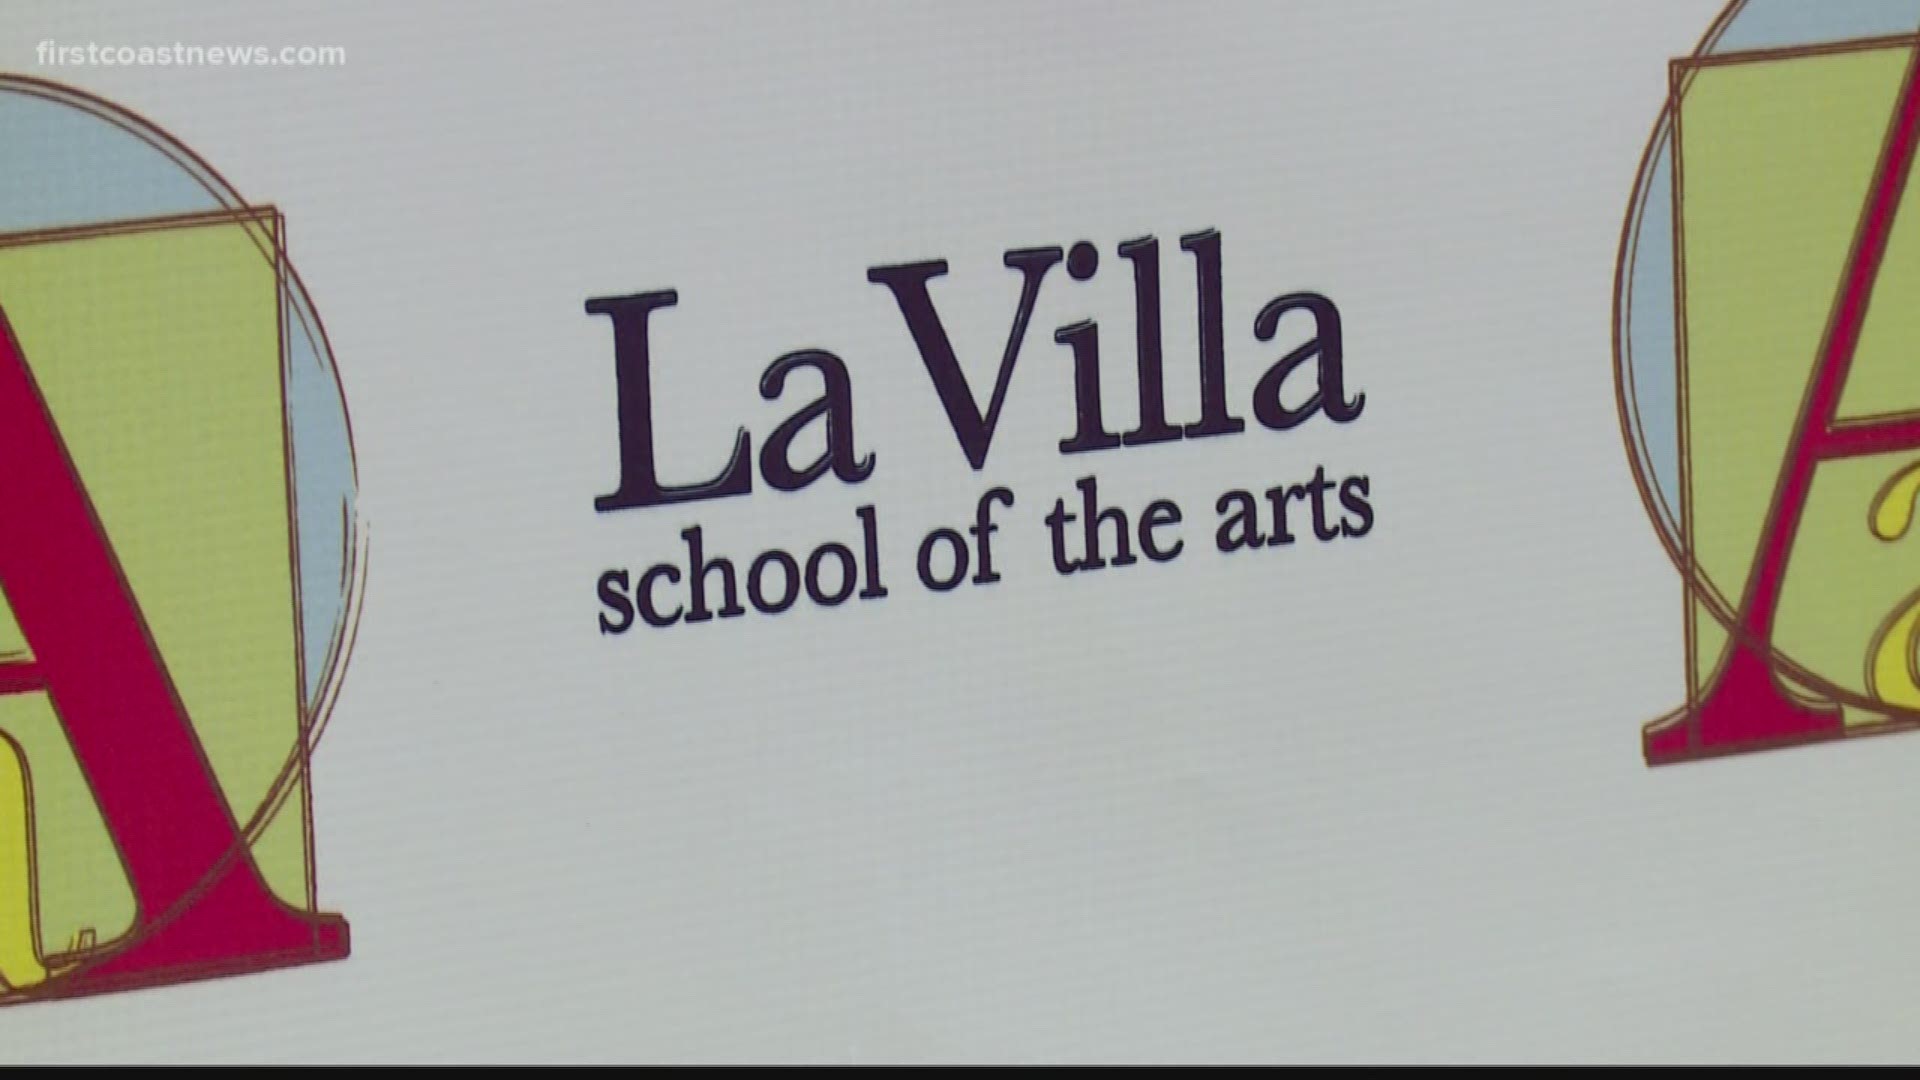 Teachers and students celebrated LaVilla School of the Arts' 20th anniversary by unveiling a mural and kicking off fundraising for the school's expansion.